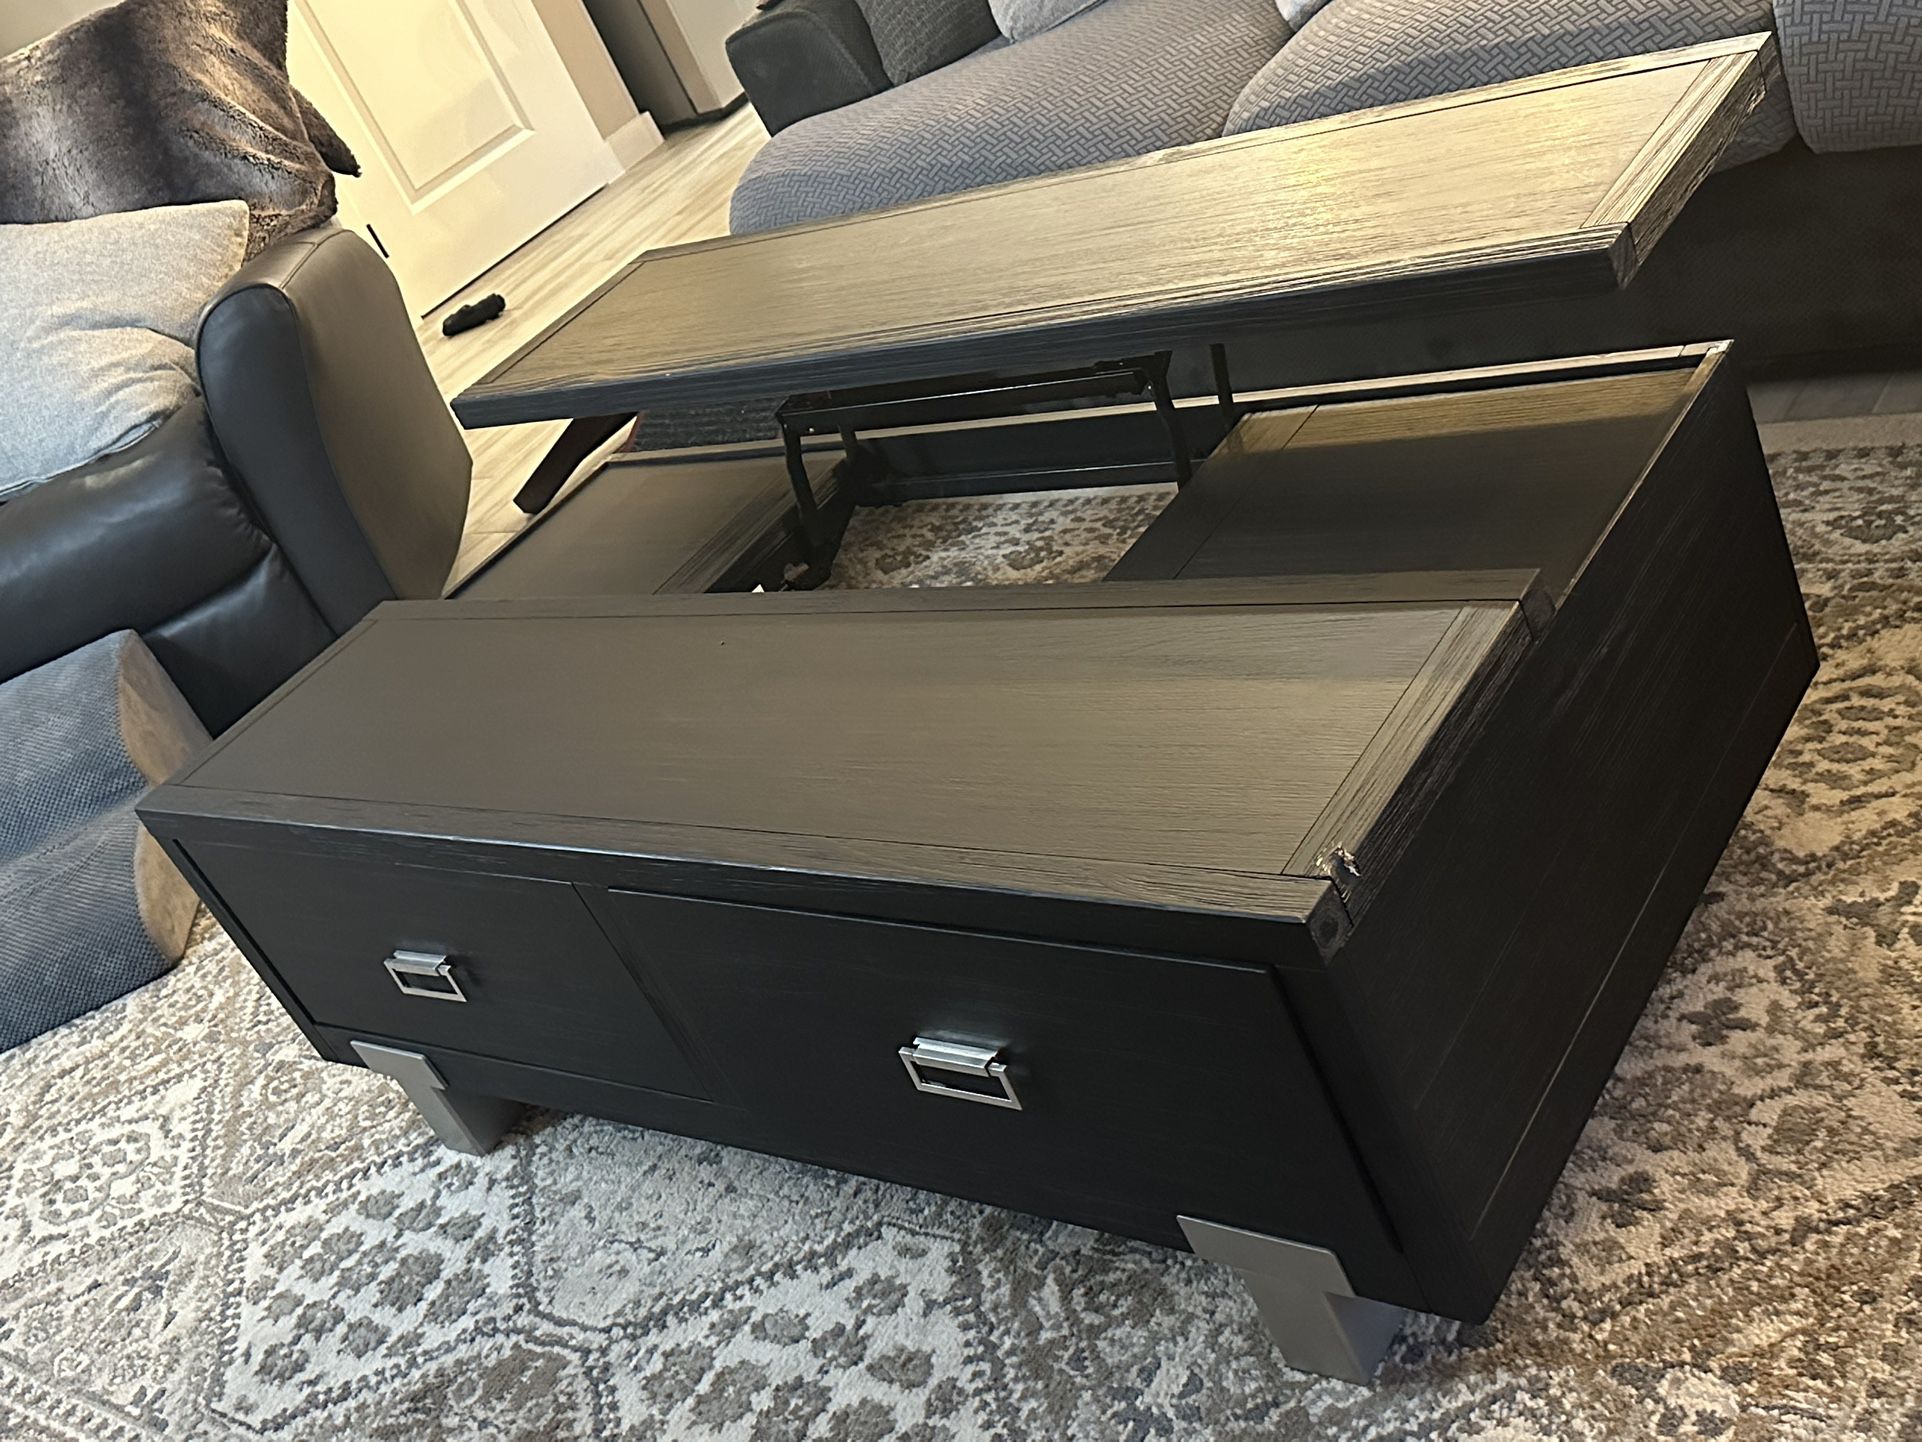 Ashley Furniture Lift-Top Coffee Table